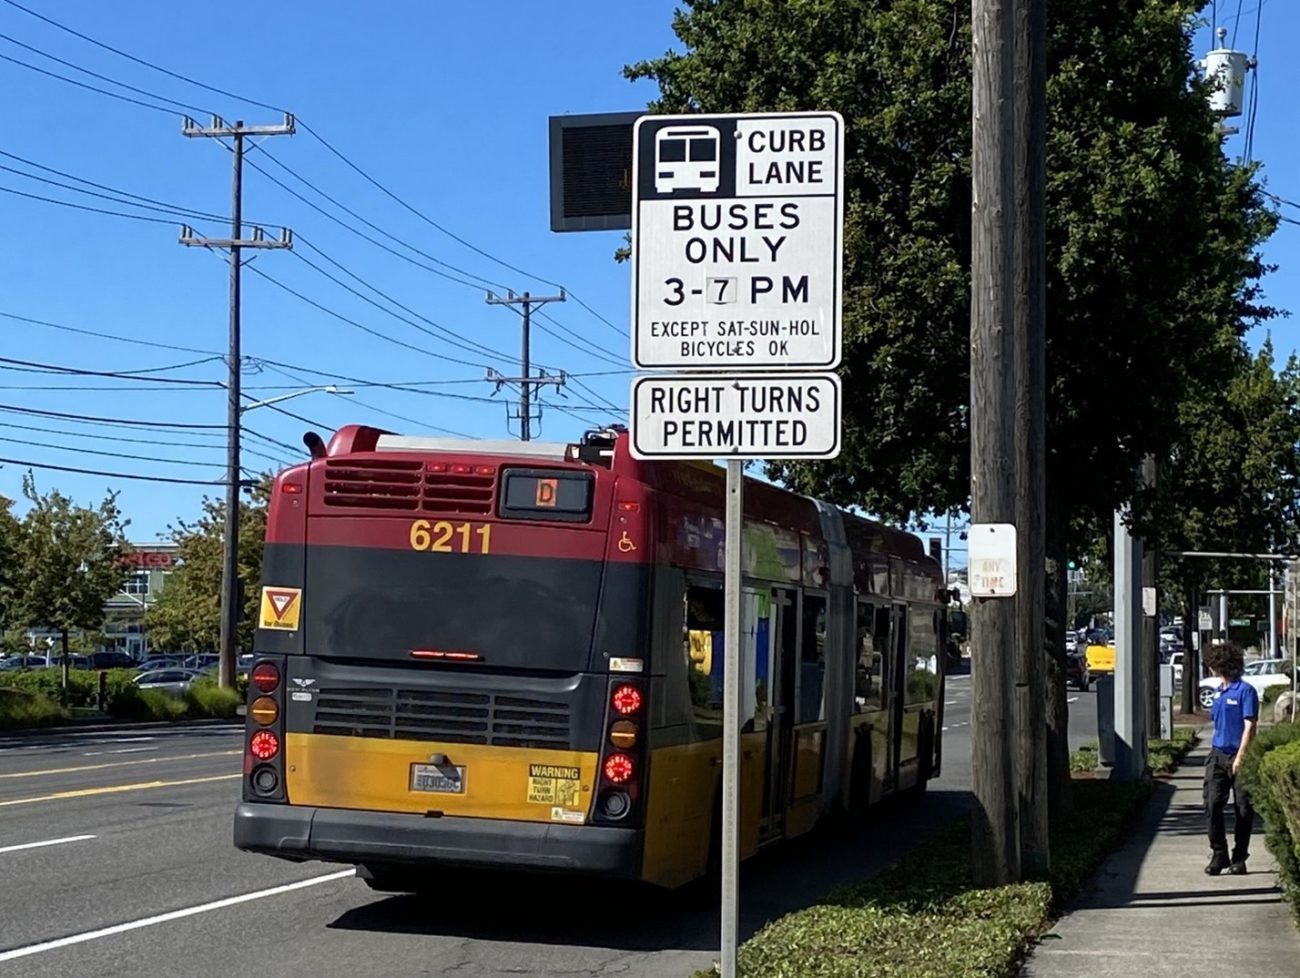 A bus travels in the existing curb lane on 15th Ave W. When not restricted to buses only, the curb lane is used for parking and loading access. Photo credit: SDOT 